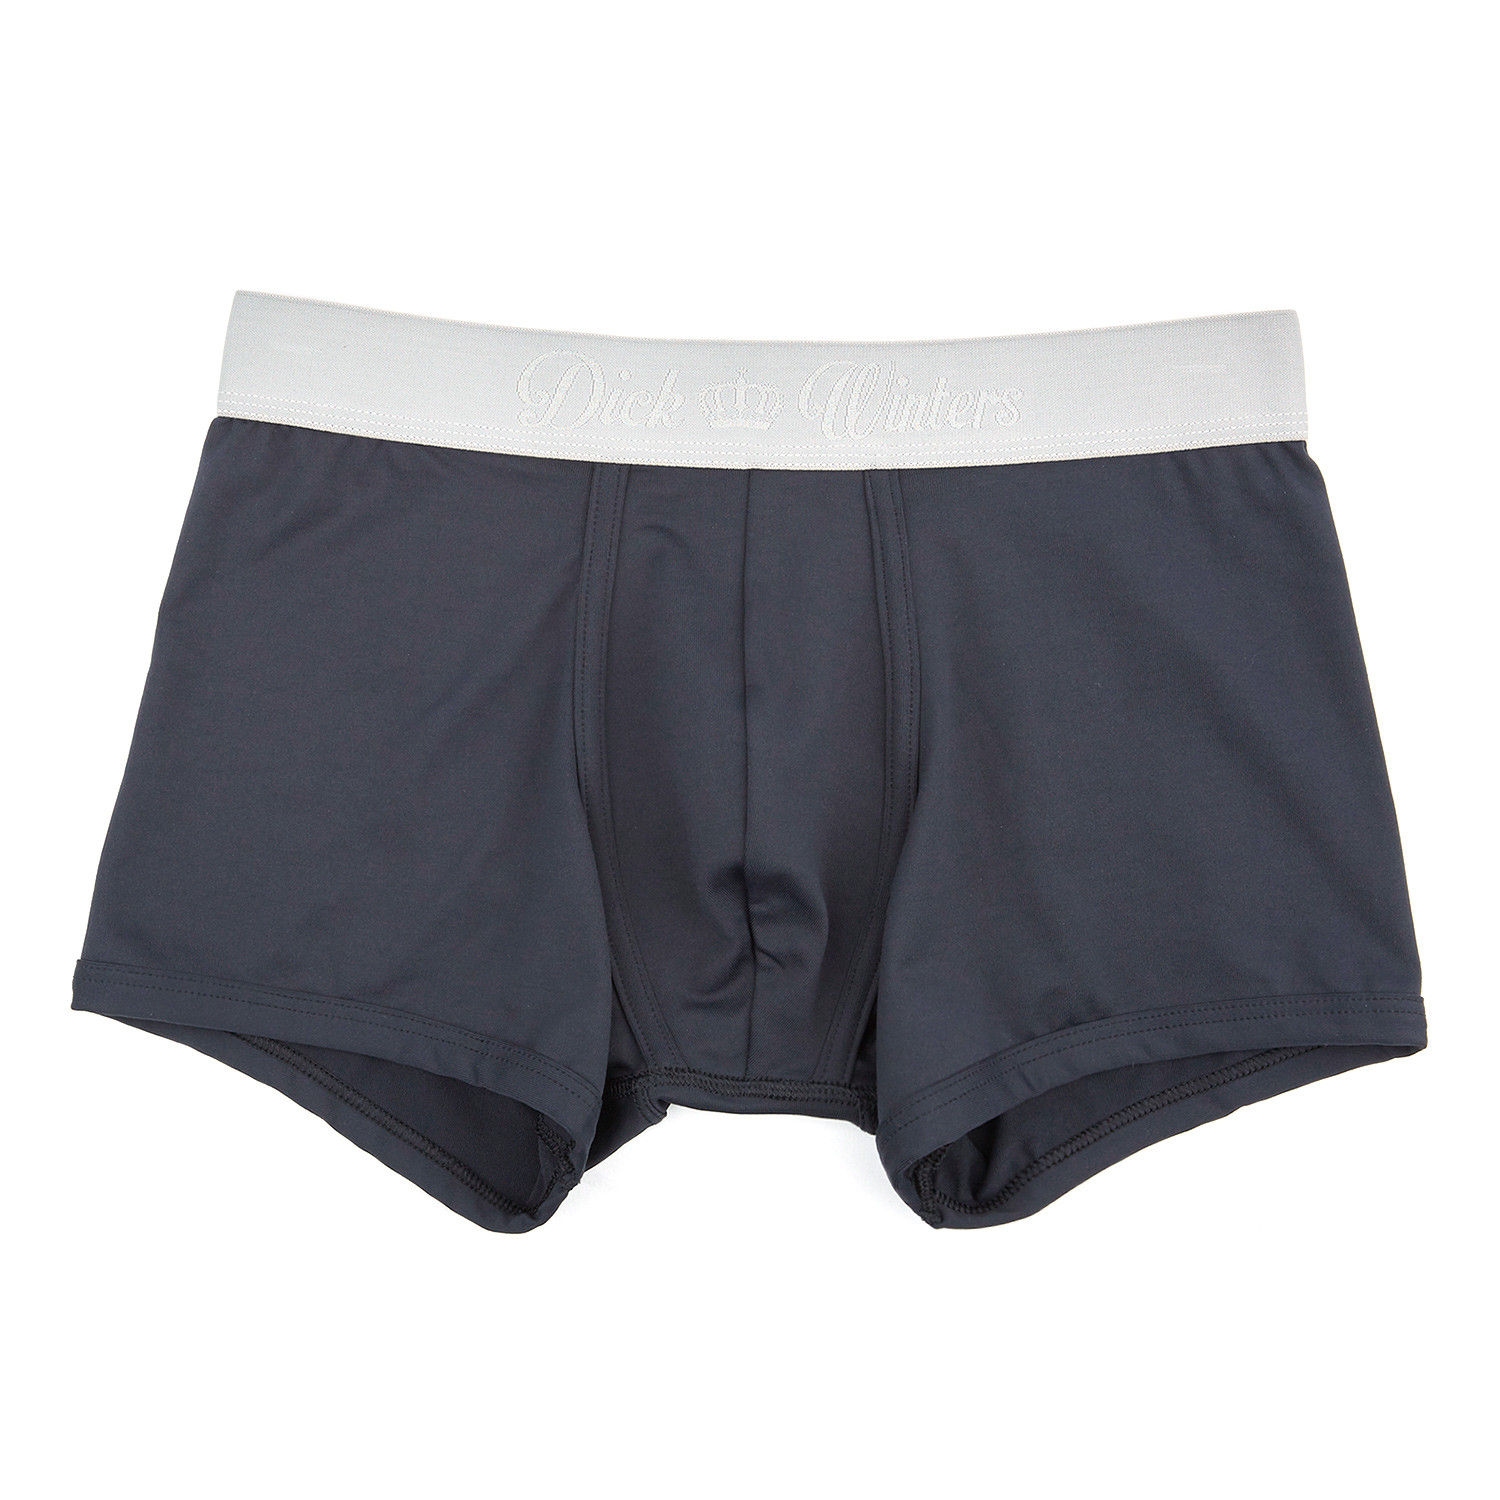 Clever Dick Boxer Short // Black (S) - Dick Winters - Touch of Modern